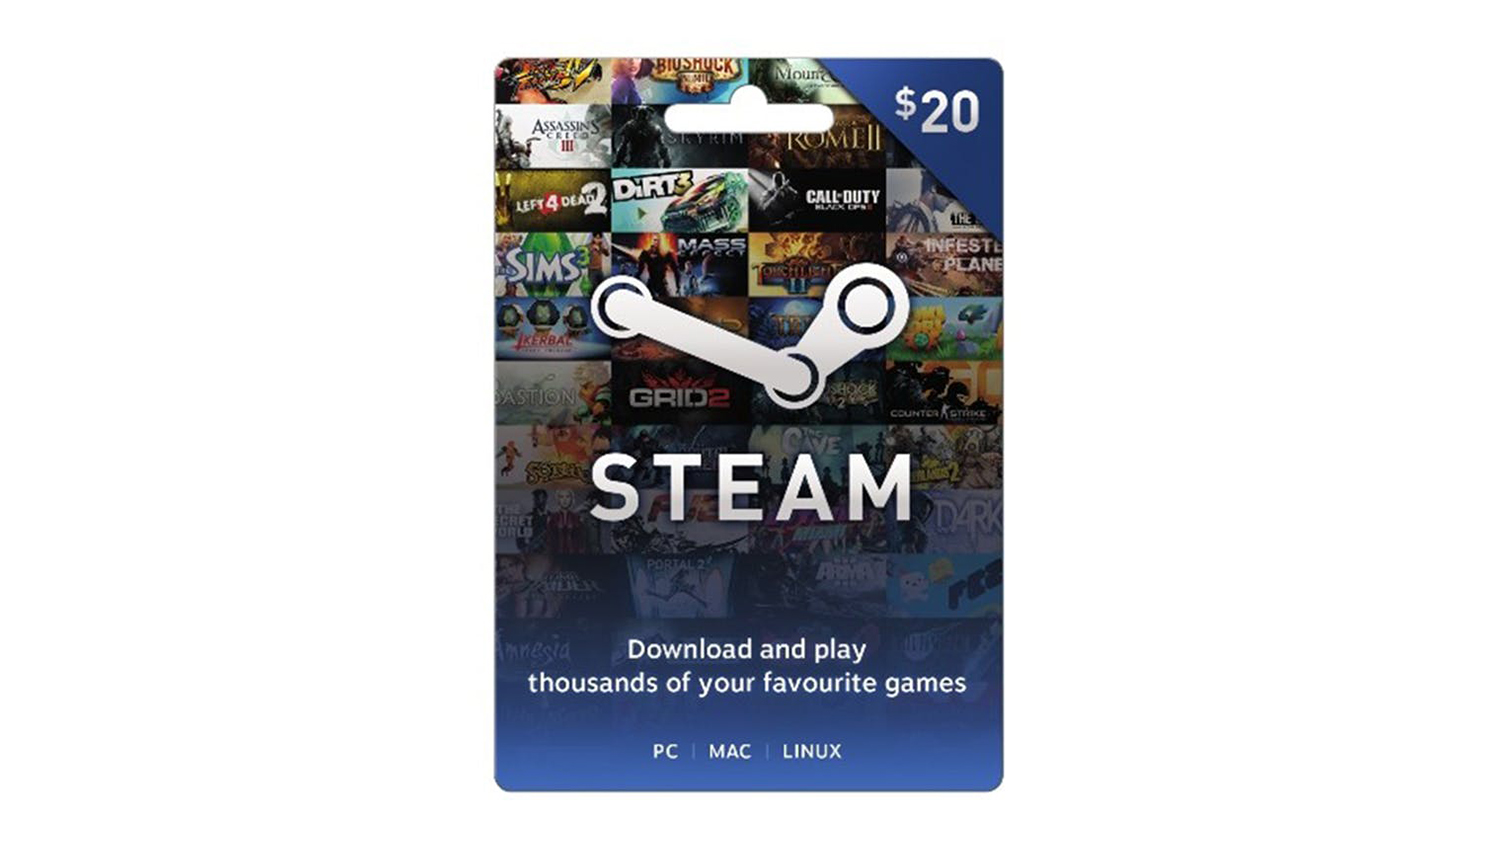 can you buy a steam gift card with steam wallet